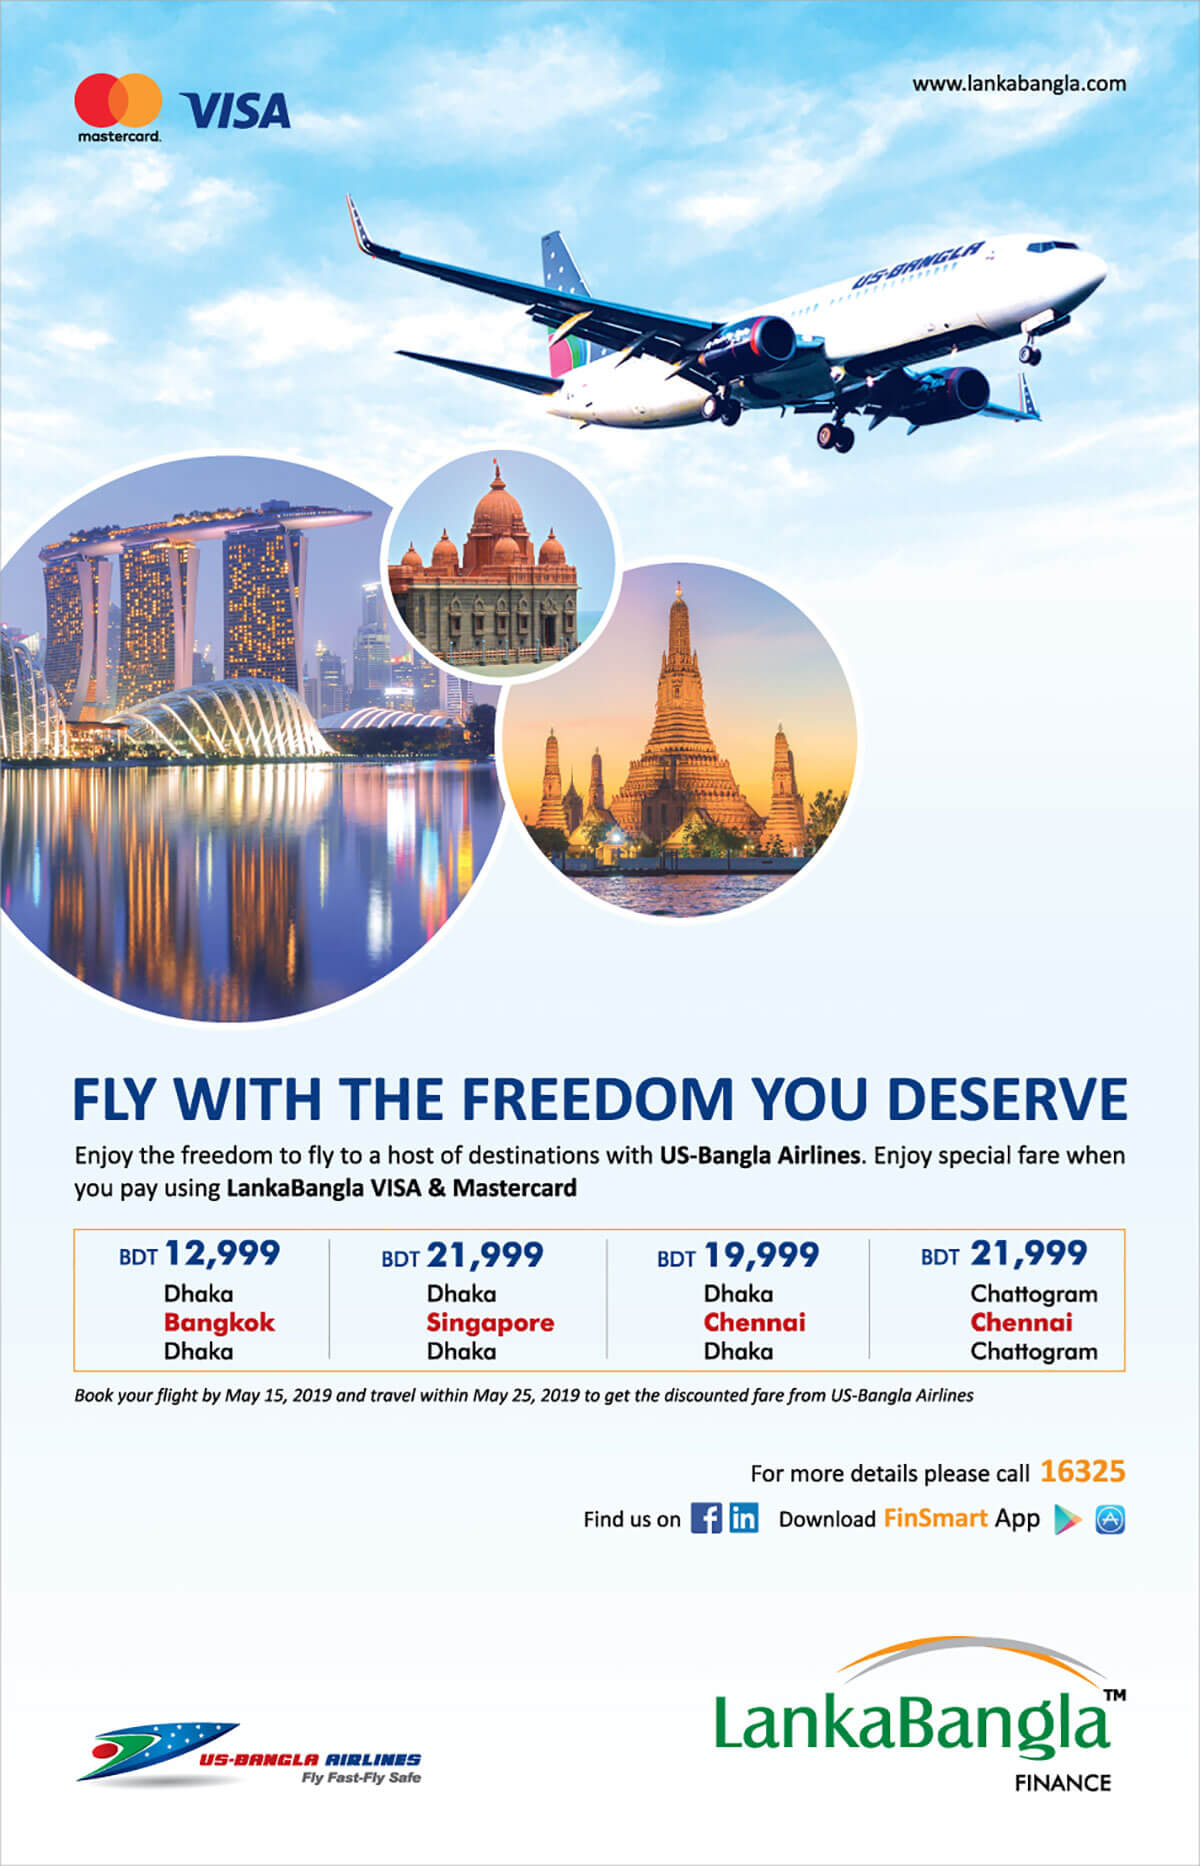 Fly With The Freedom You Deserve with US-Bangla Airlines